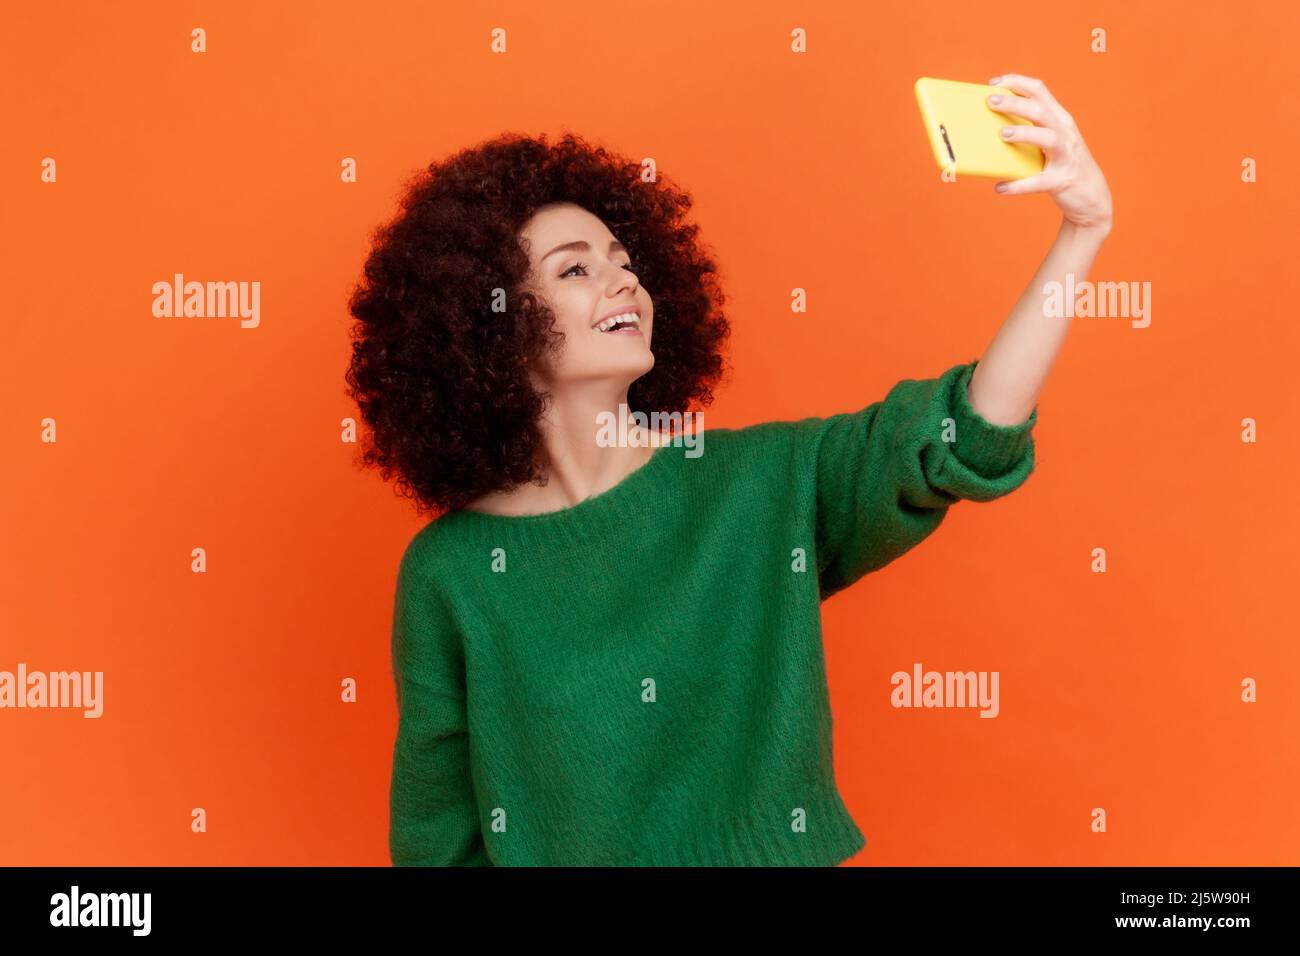 Happy friendly blogger woman with Afro hairstyle wearing green sweater broadcasting livestream, talking with followers with positive expression. Indoor studio shot isolated on orange background. Stock Photo